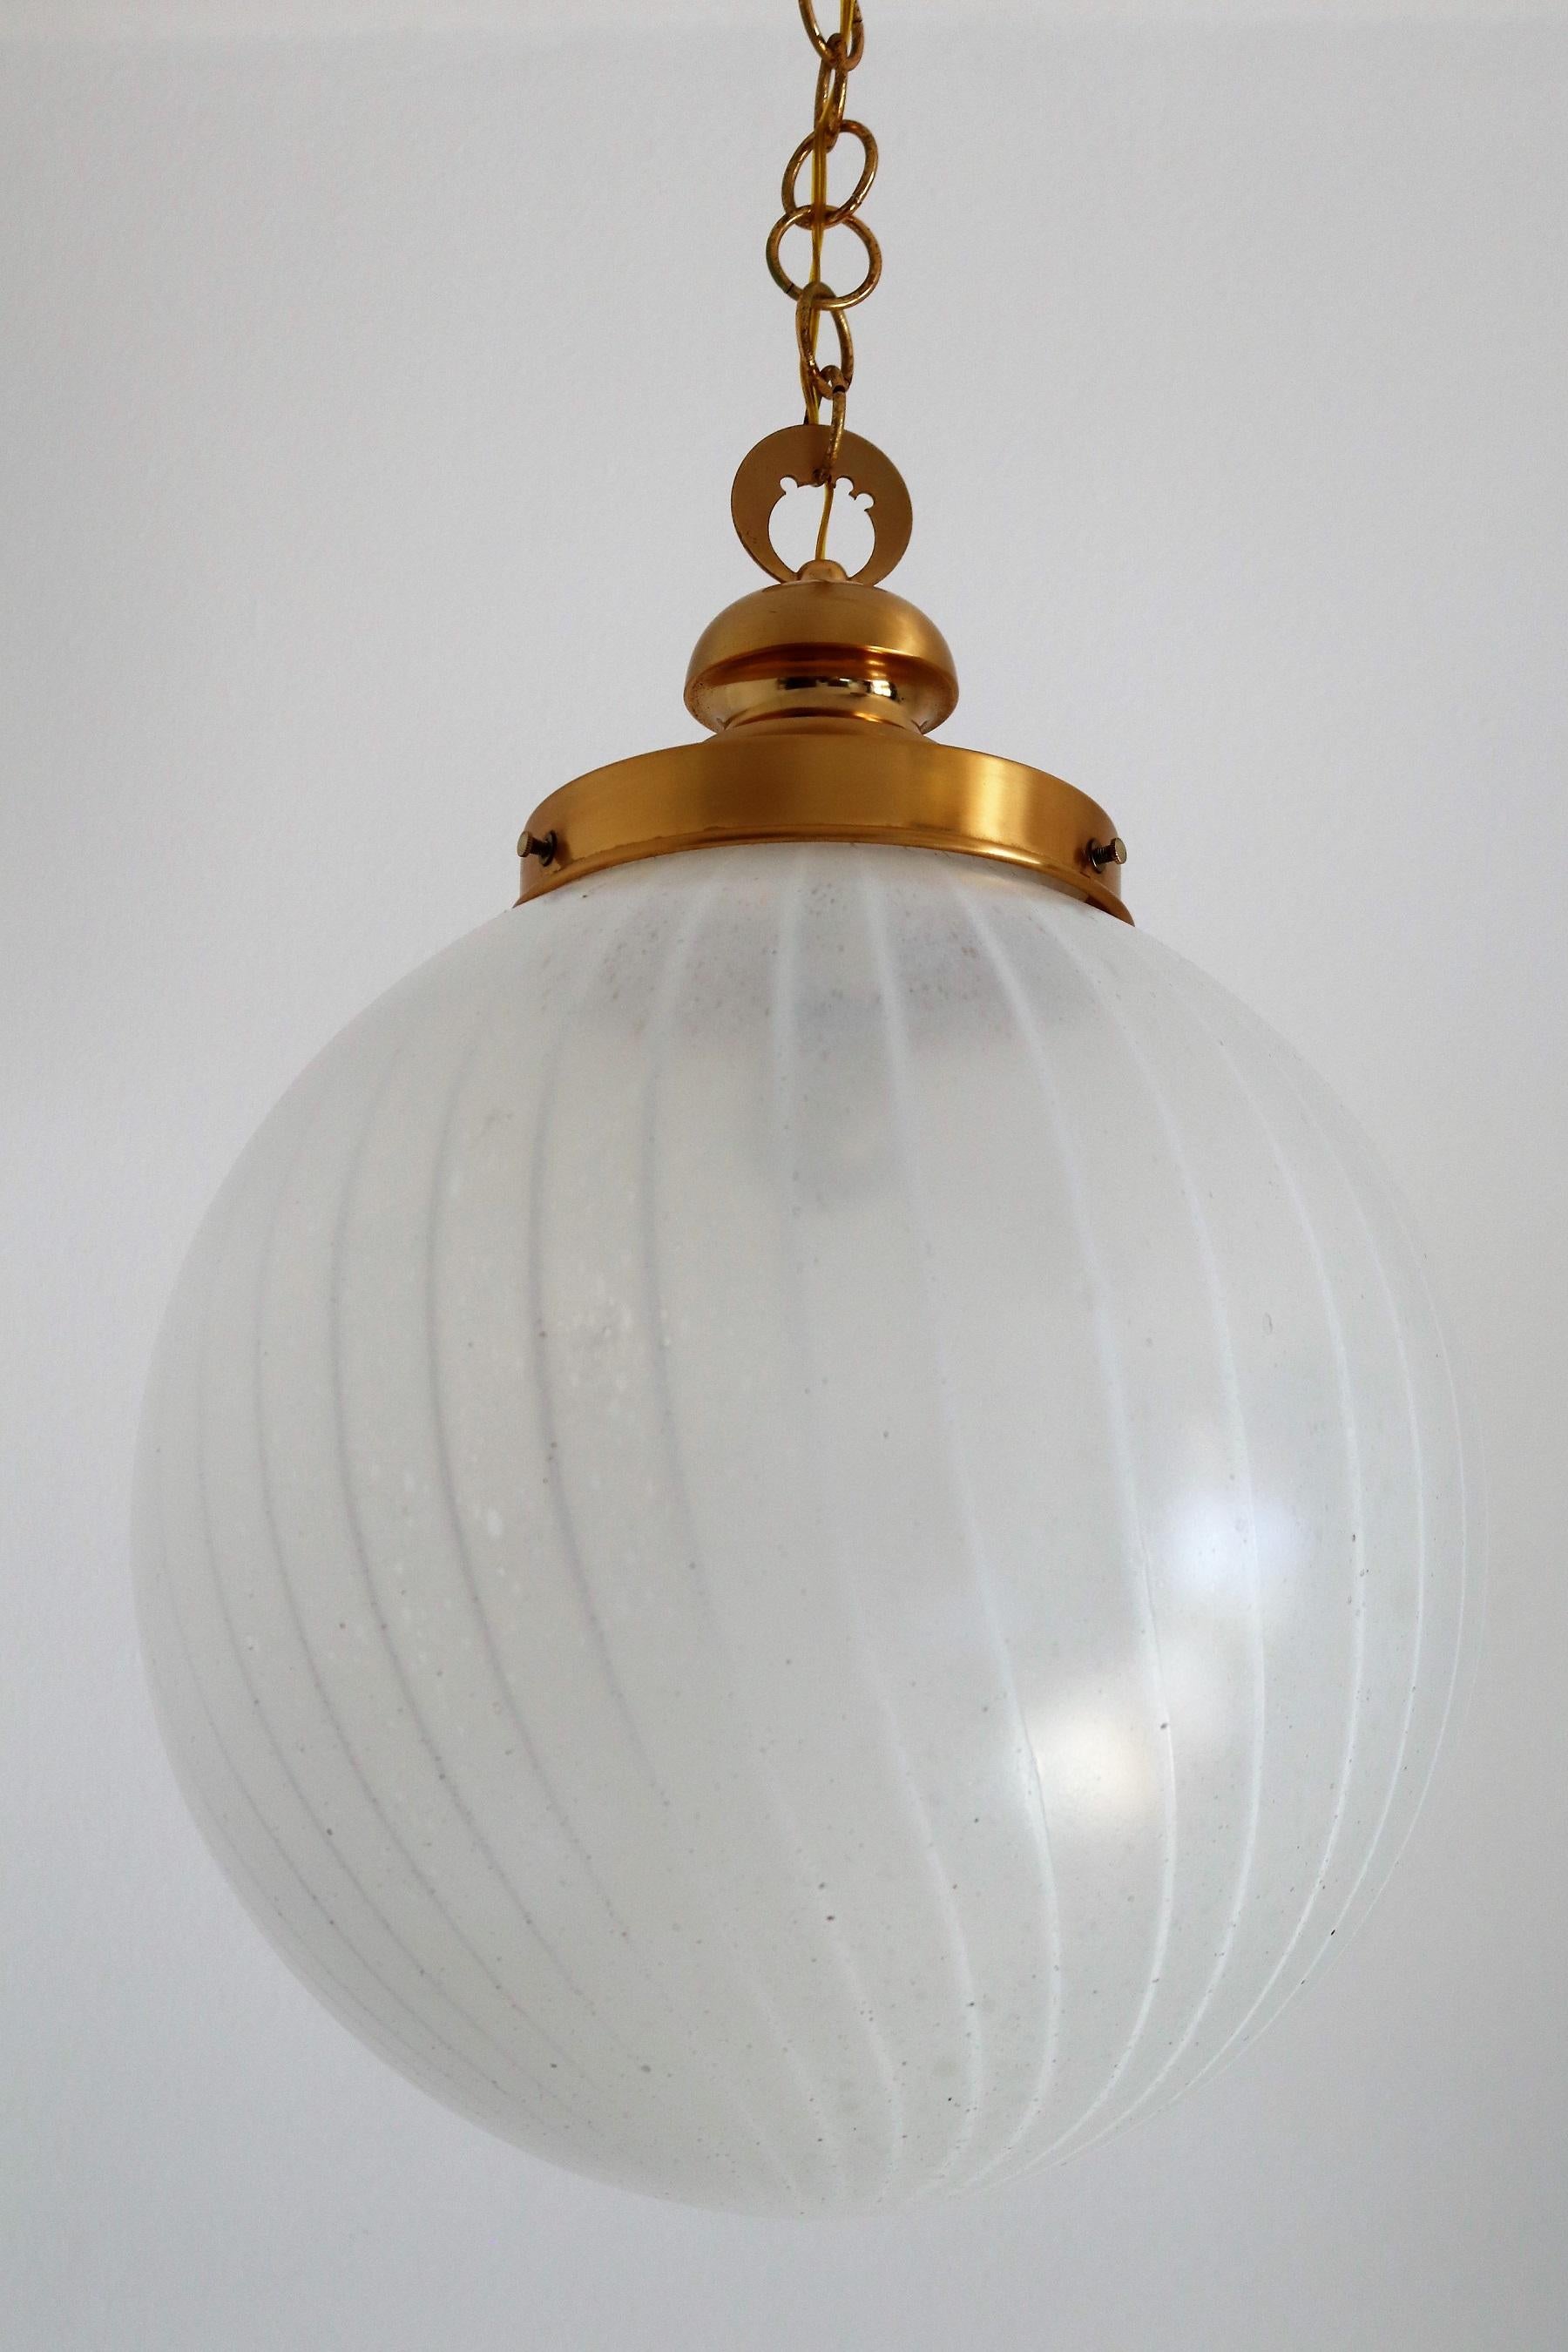 Italian Midcentury Murano Glass Globe Pendant Chandelier with Brass Details, 60s For Sale 3